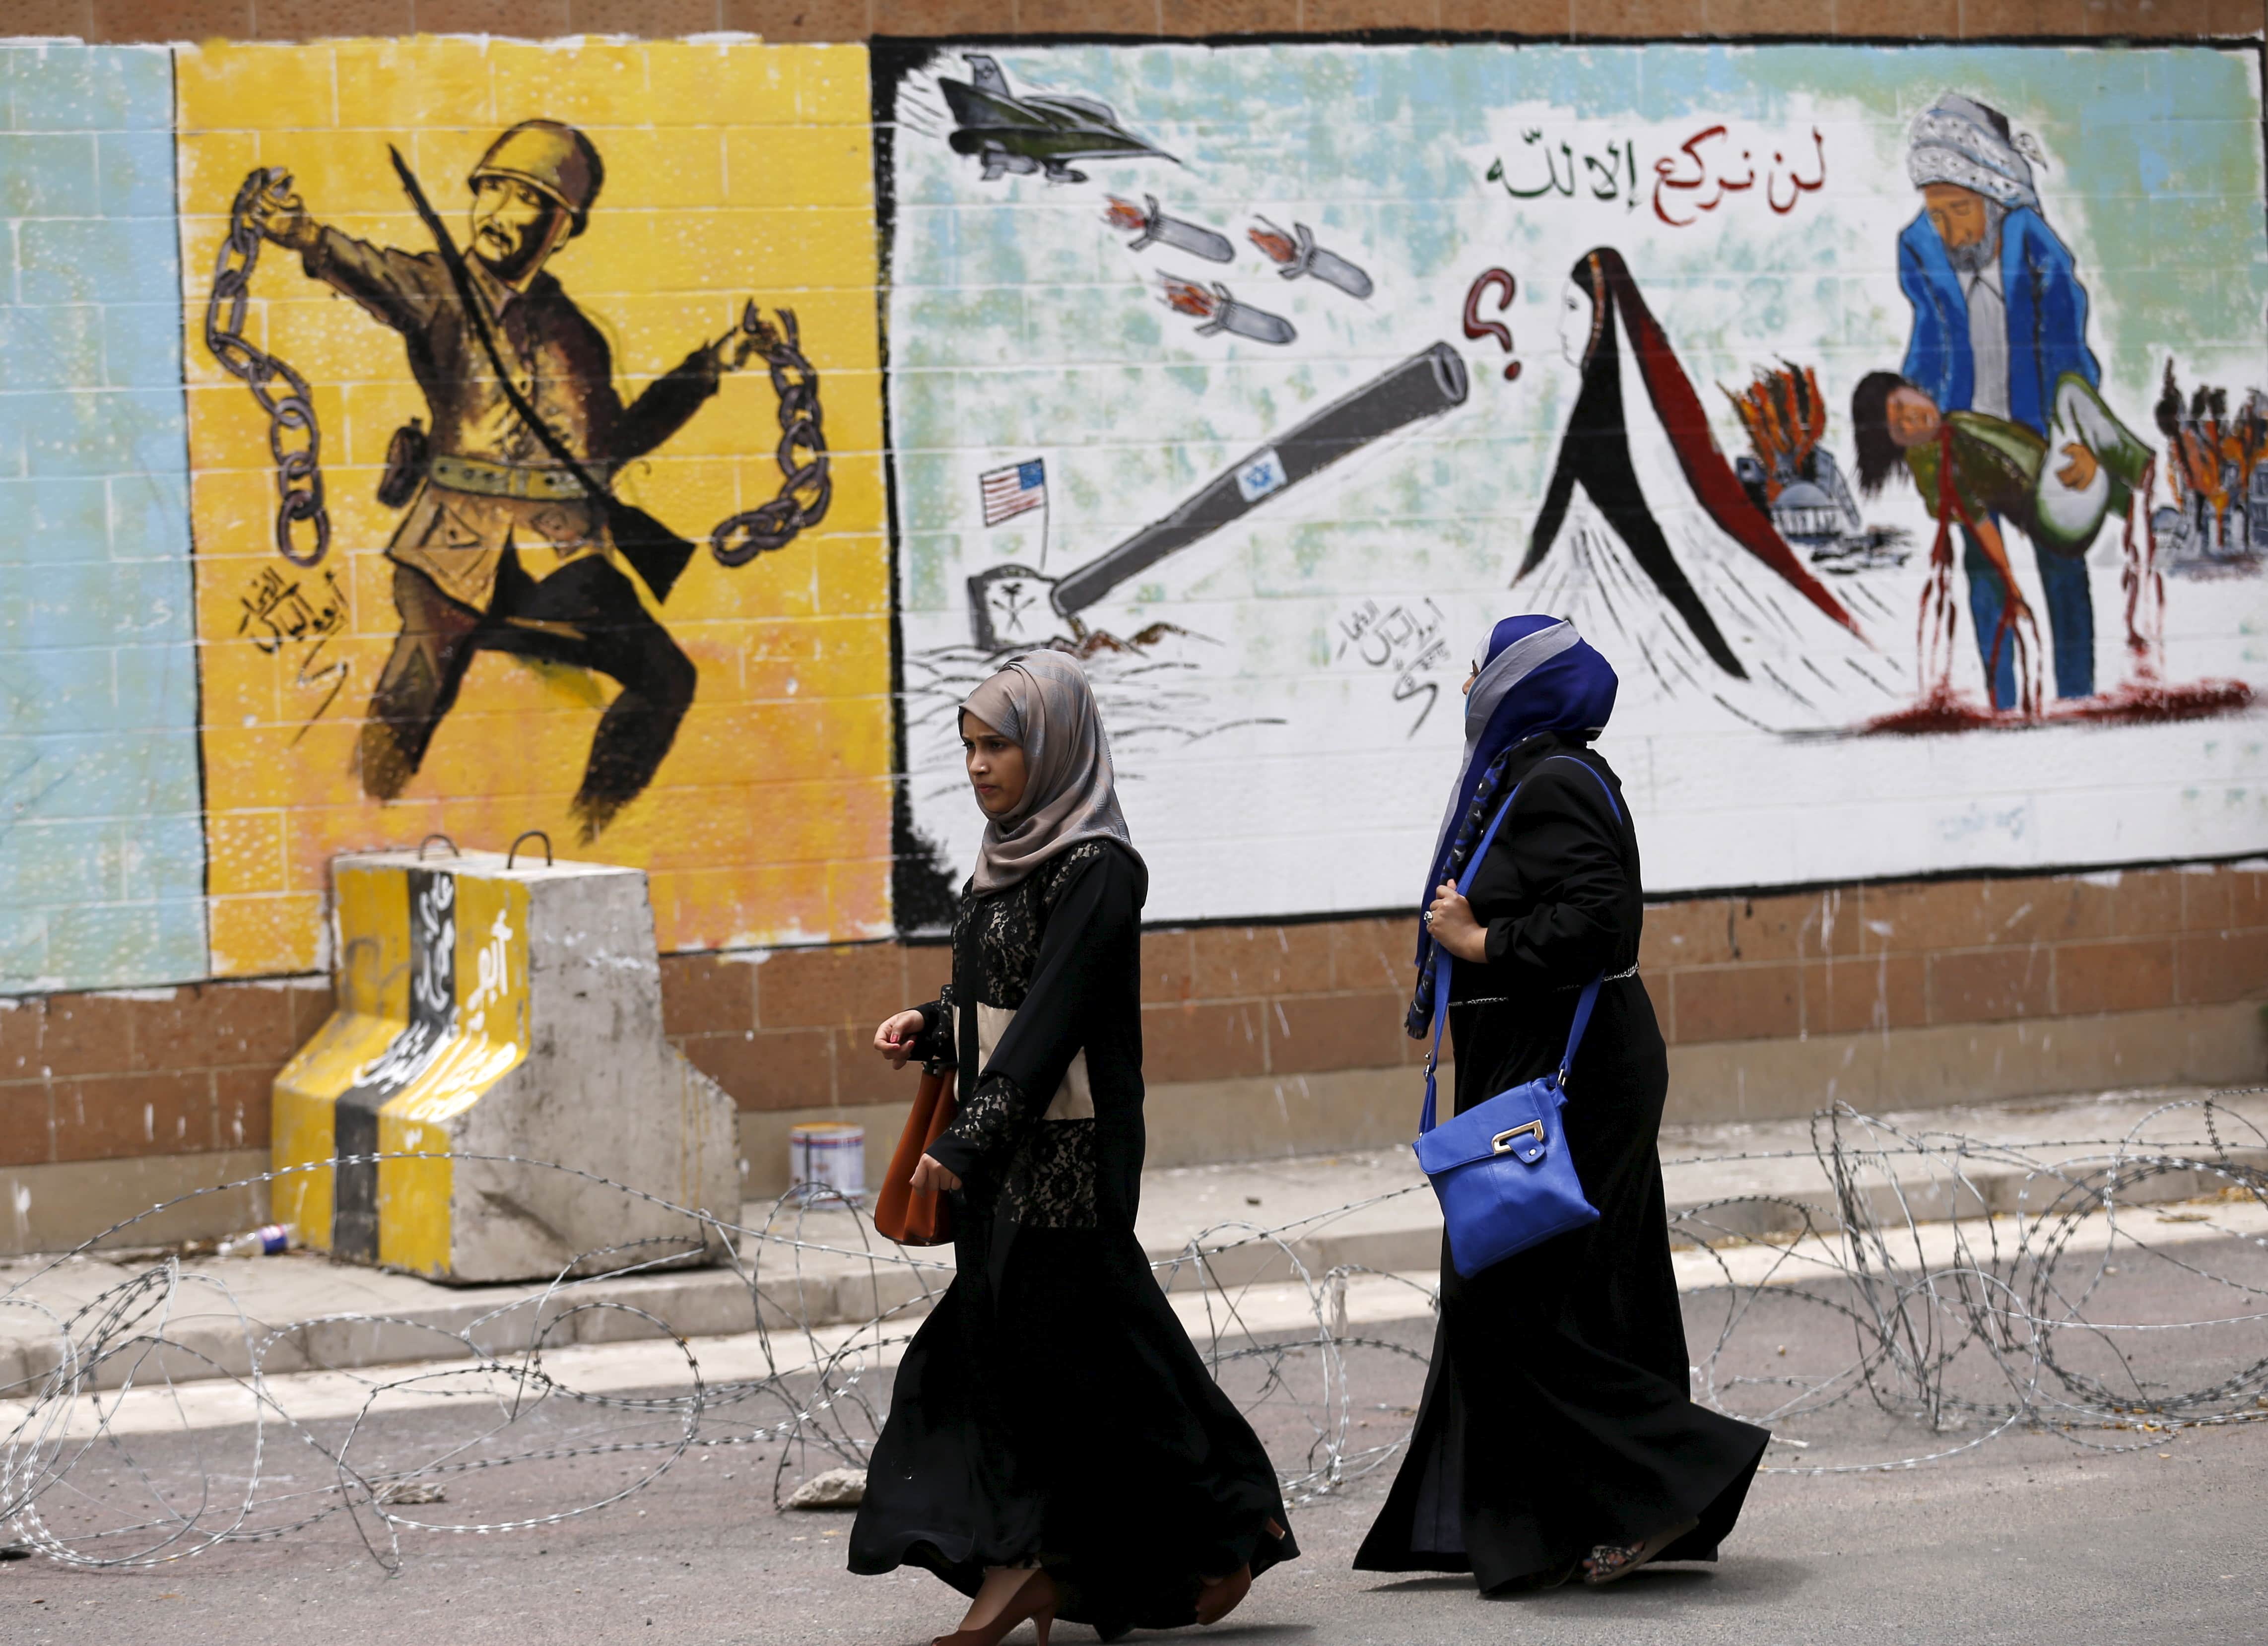 Women walk past graffiti painted by pro-Houthi activists on the wall of the Saudi embassy in Yemen's capital Sanaa August 18, 2015, REUTERS/Khaled Abdullah